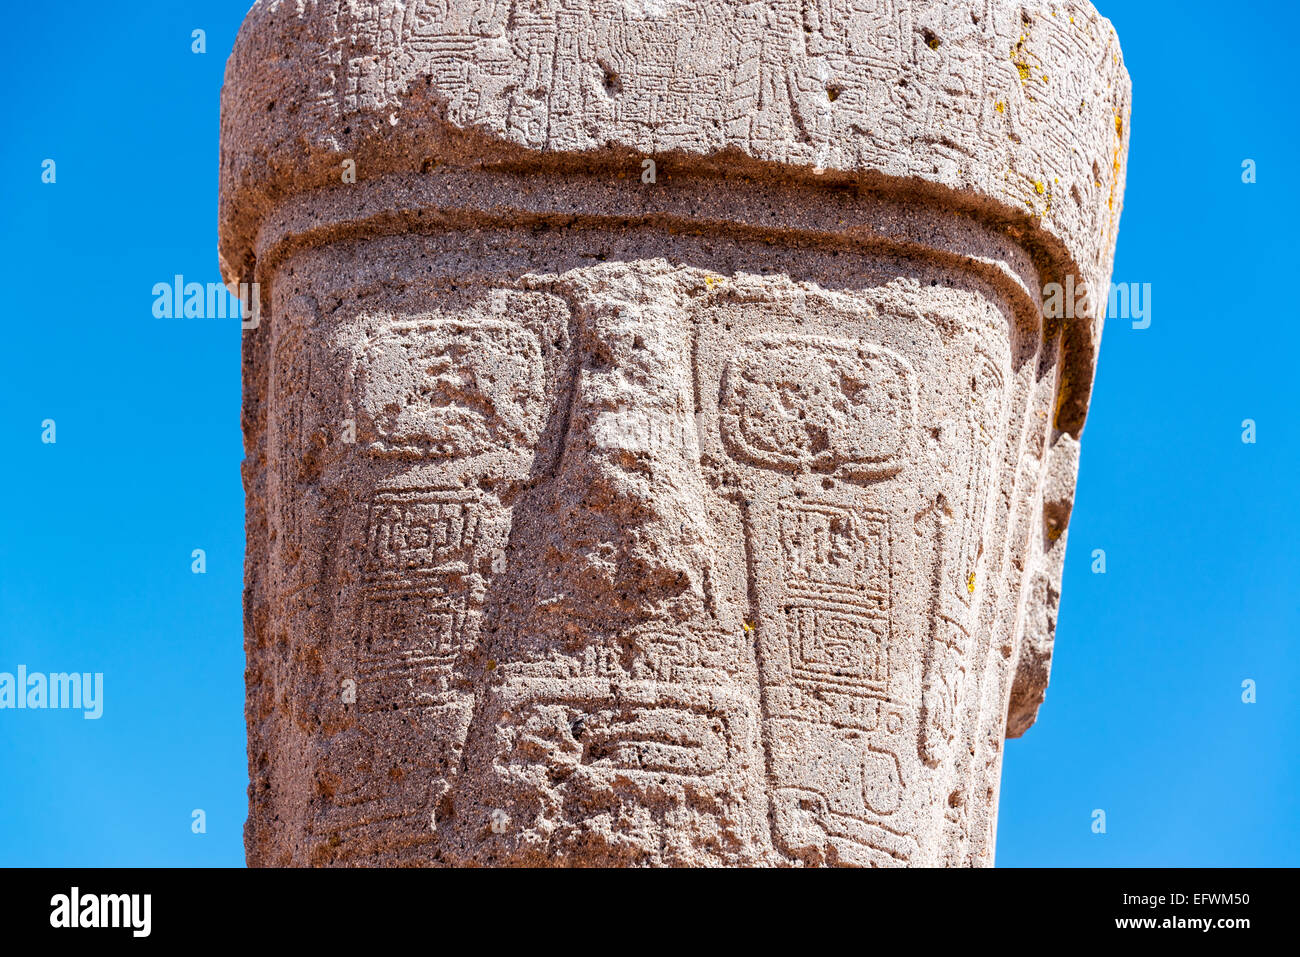 Closeup view of the face of a monolith at the UNESCO World Heritage site of Tiwanaku near La Paz, Bolivia Stock Photo